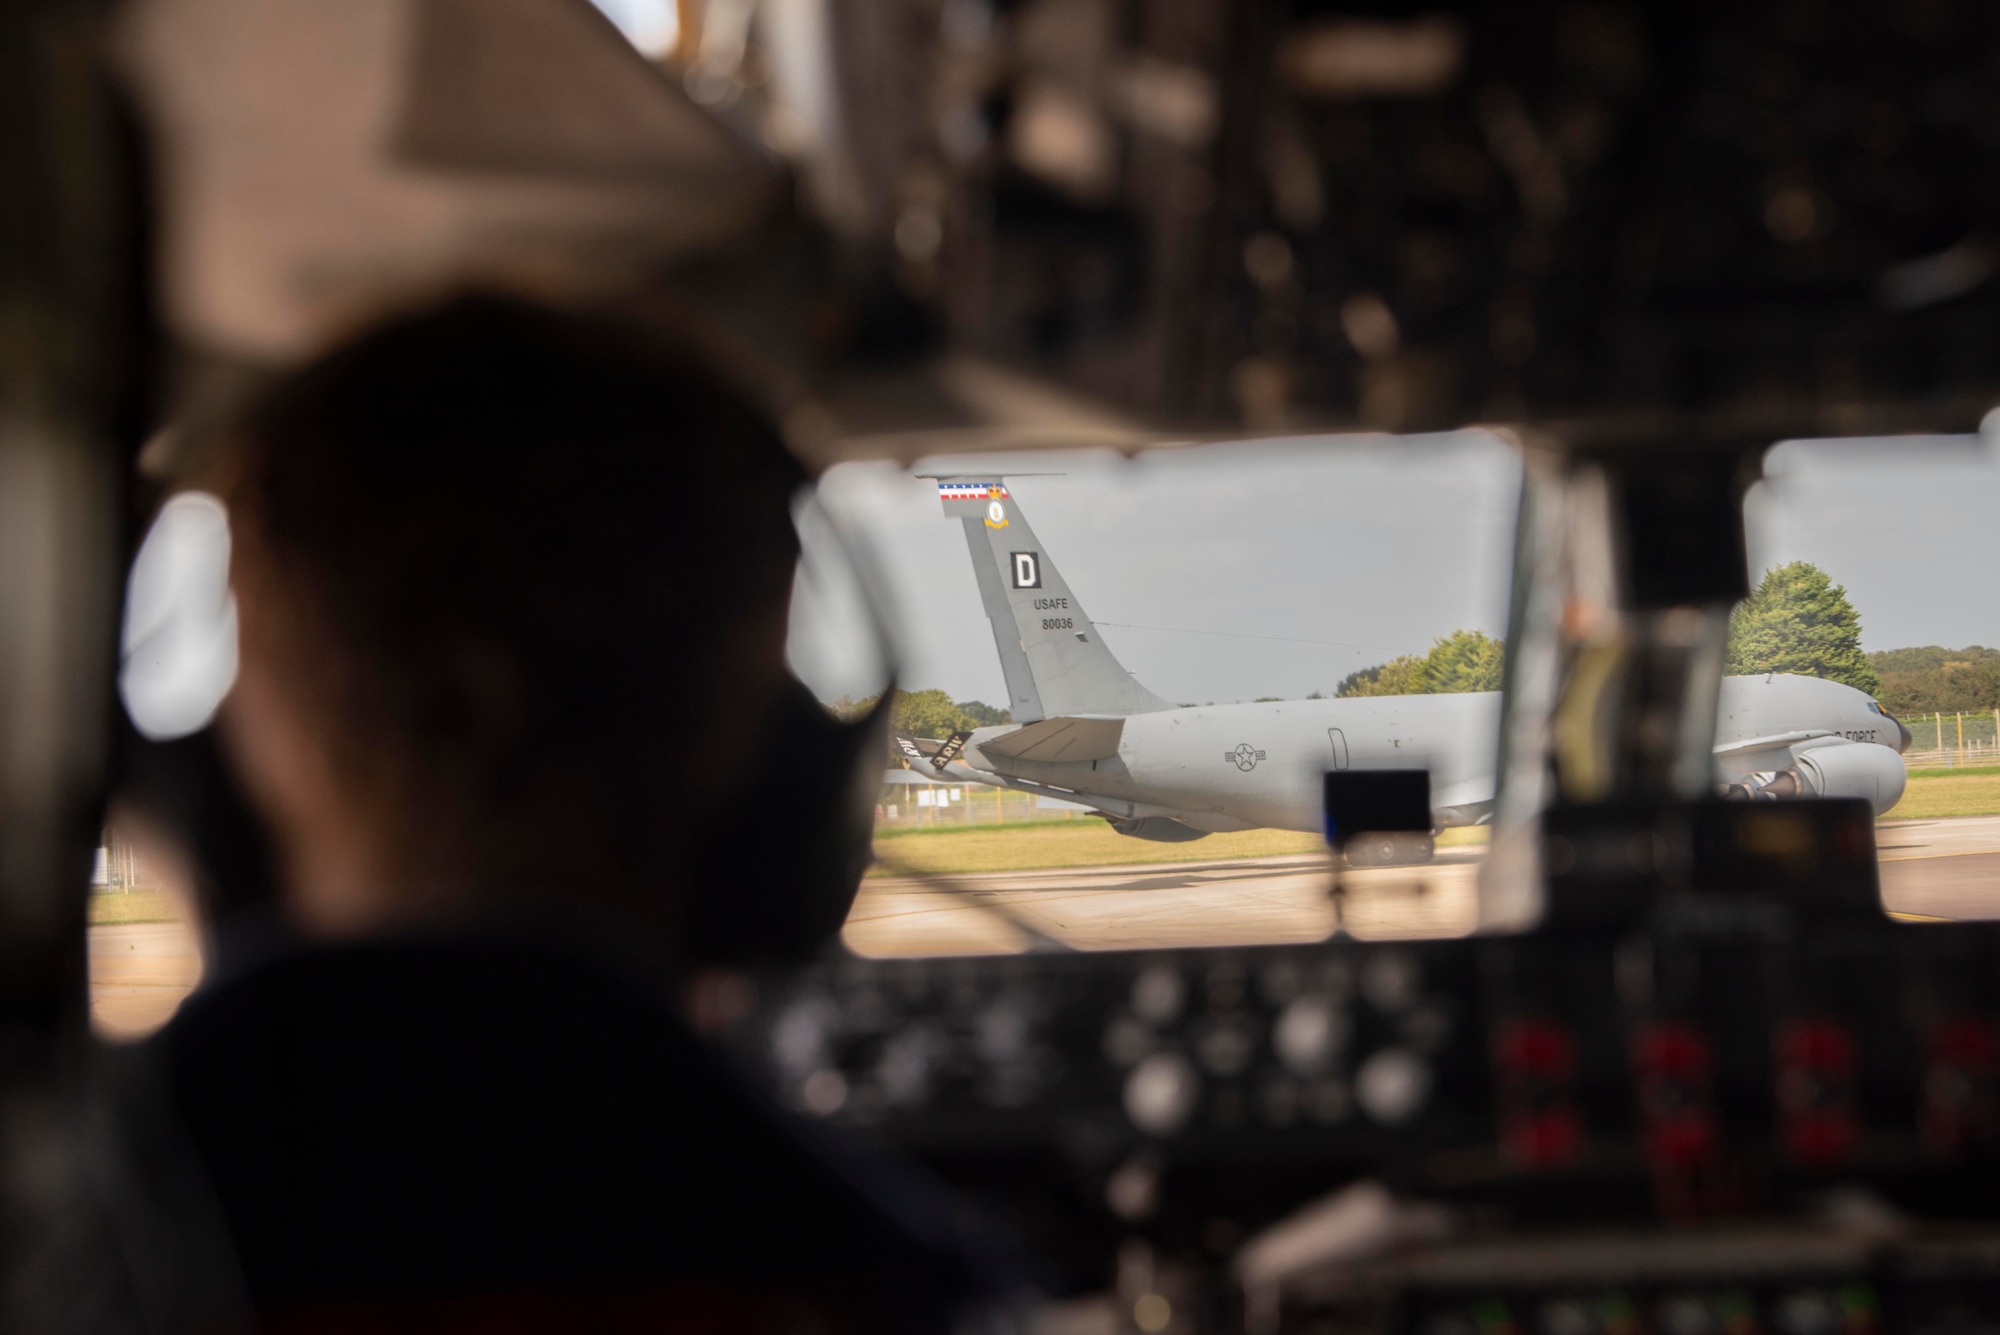 Major Christopher Miller, 351st Air Refueling Squadron pilot, waits for a KC-135 Stratotanker aircraft to turn onto the runway before taxiing at Royal Air Force Mildenhall, England, Sept. 10, 2020. Multiple KC-135 aircraft assigned to the 100th Air Refueling Wing helped refine the skill sets of allied and partner-nation pilots through aerial refueling support over the North Sea as part of exercise Point Blank. (U.S. Air Force photo by Airman 1st Class Joseph Barron)